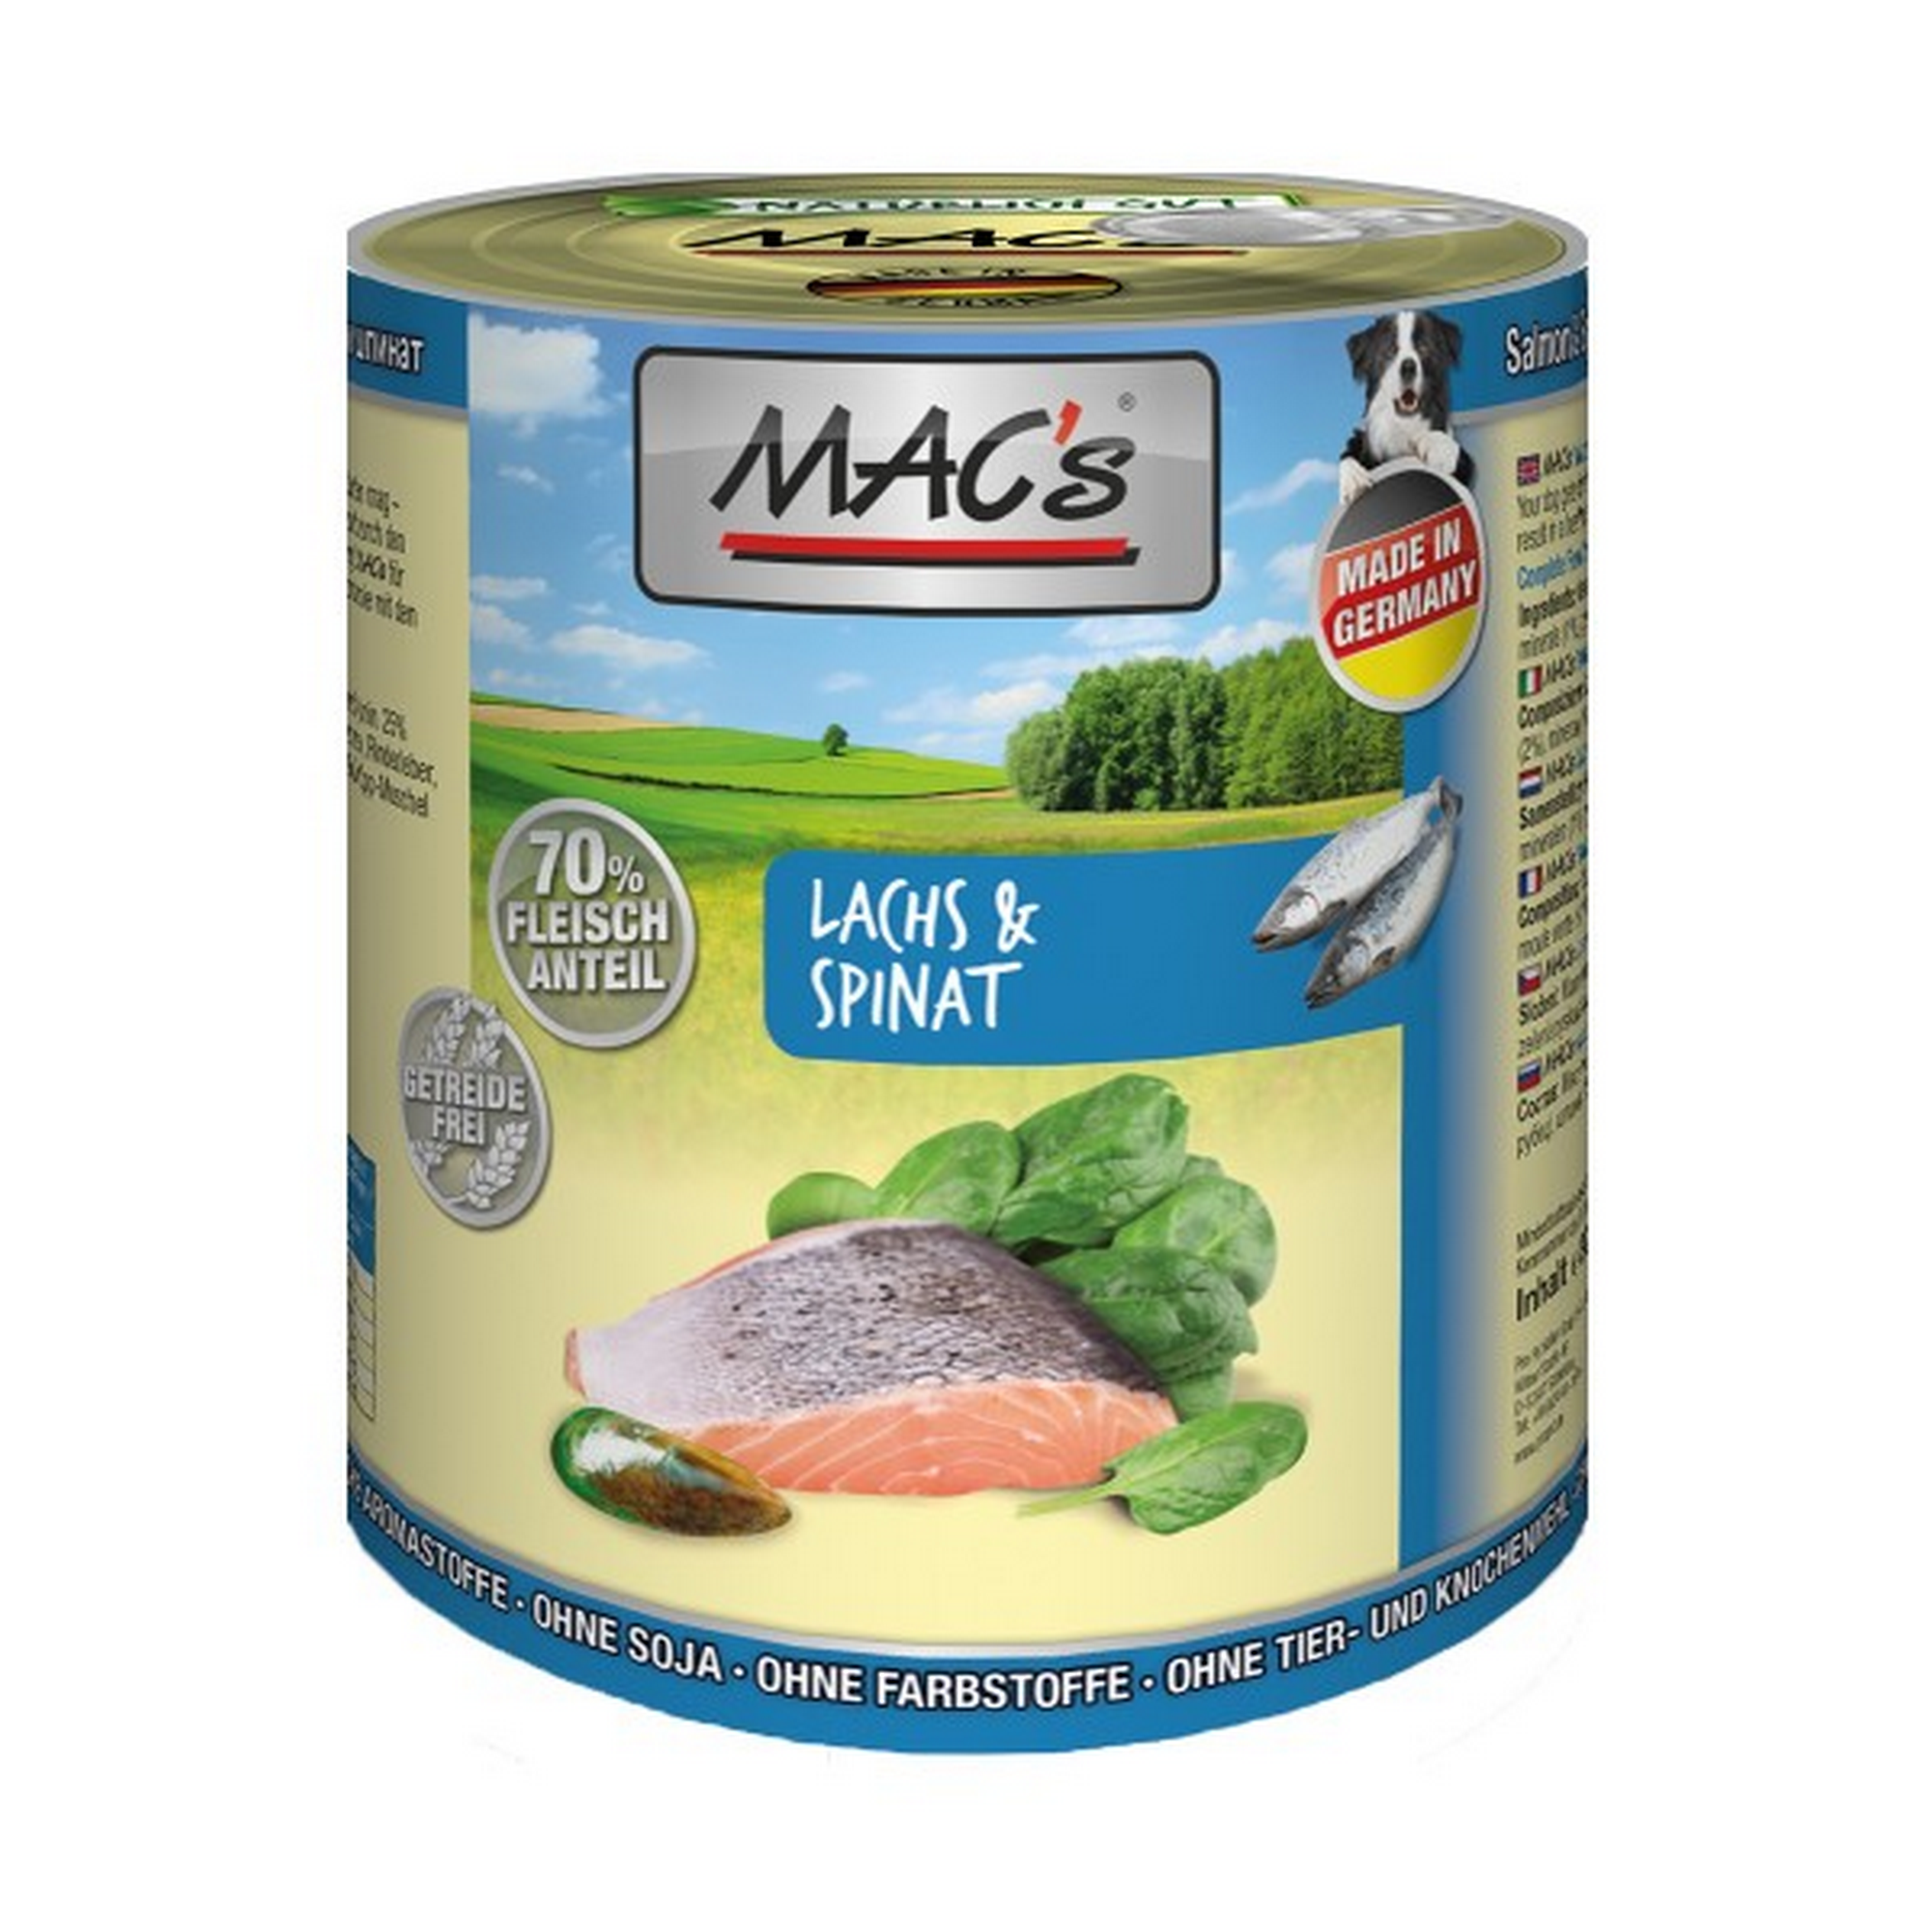 Hundenassfutter 'Dog' Lachs und Spinat 800 g + product picture